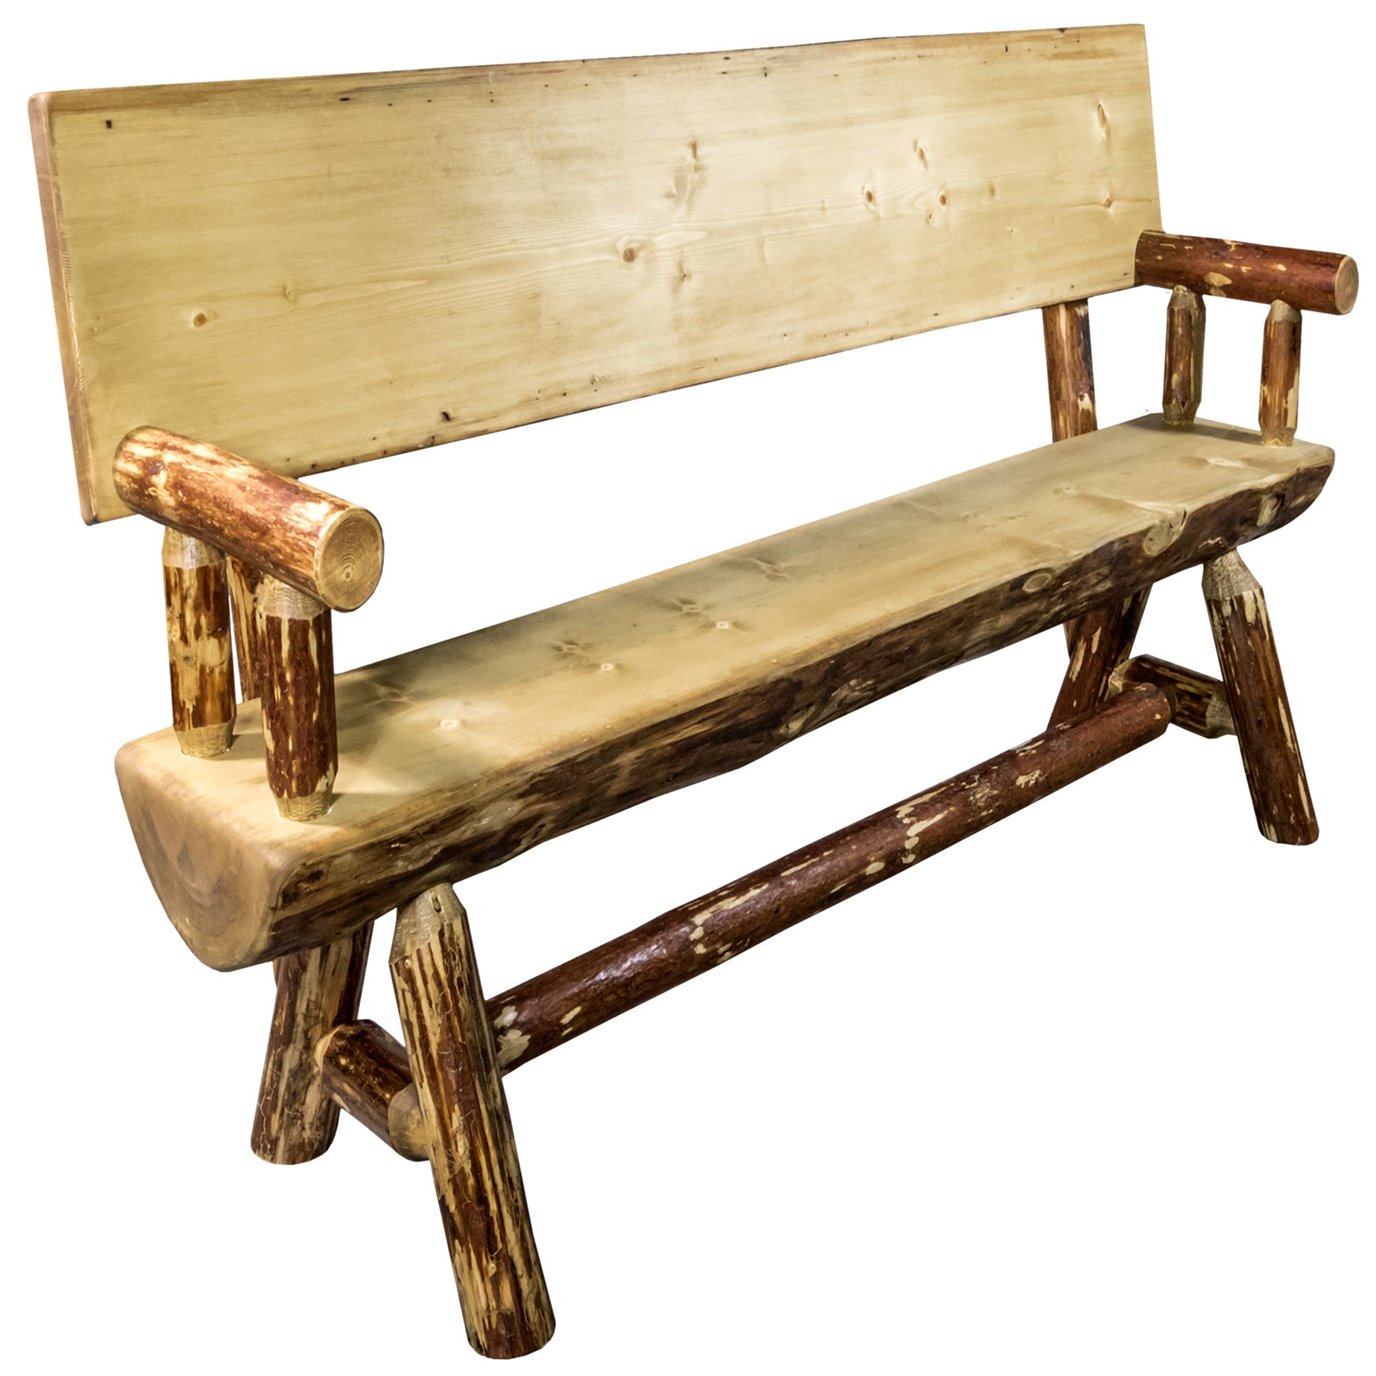 Glacier 4 Foot Half Log Bench w/ Back & Arms - Exterior Stain Finish